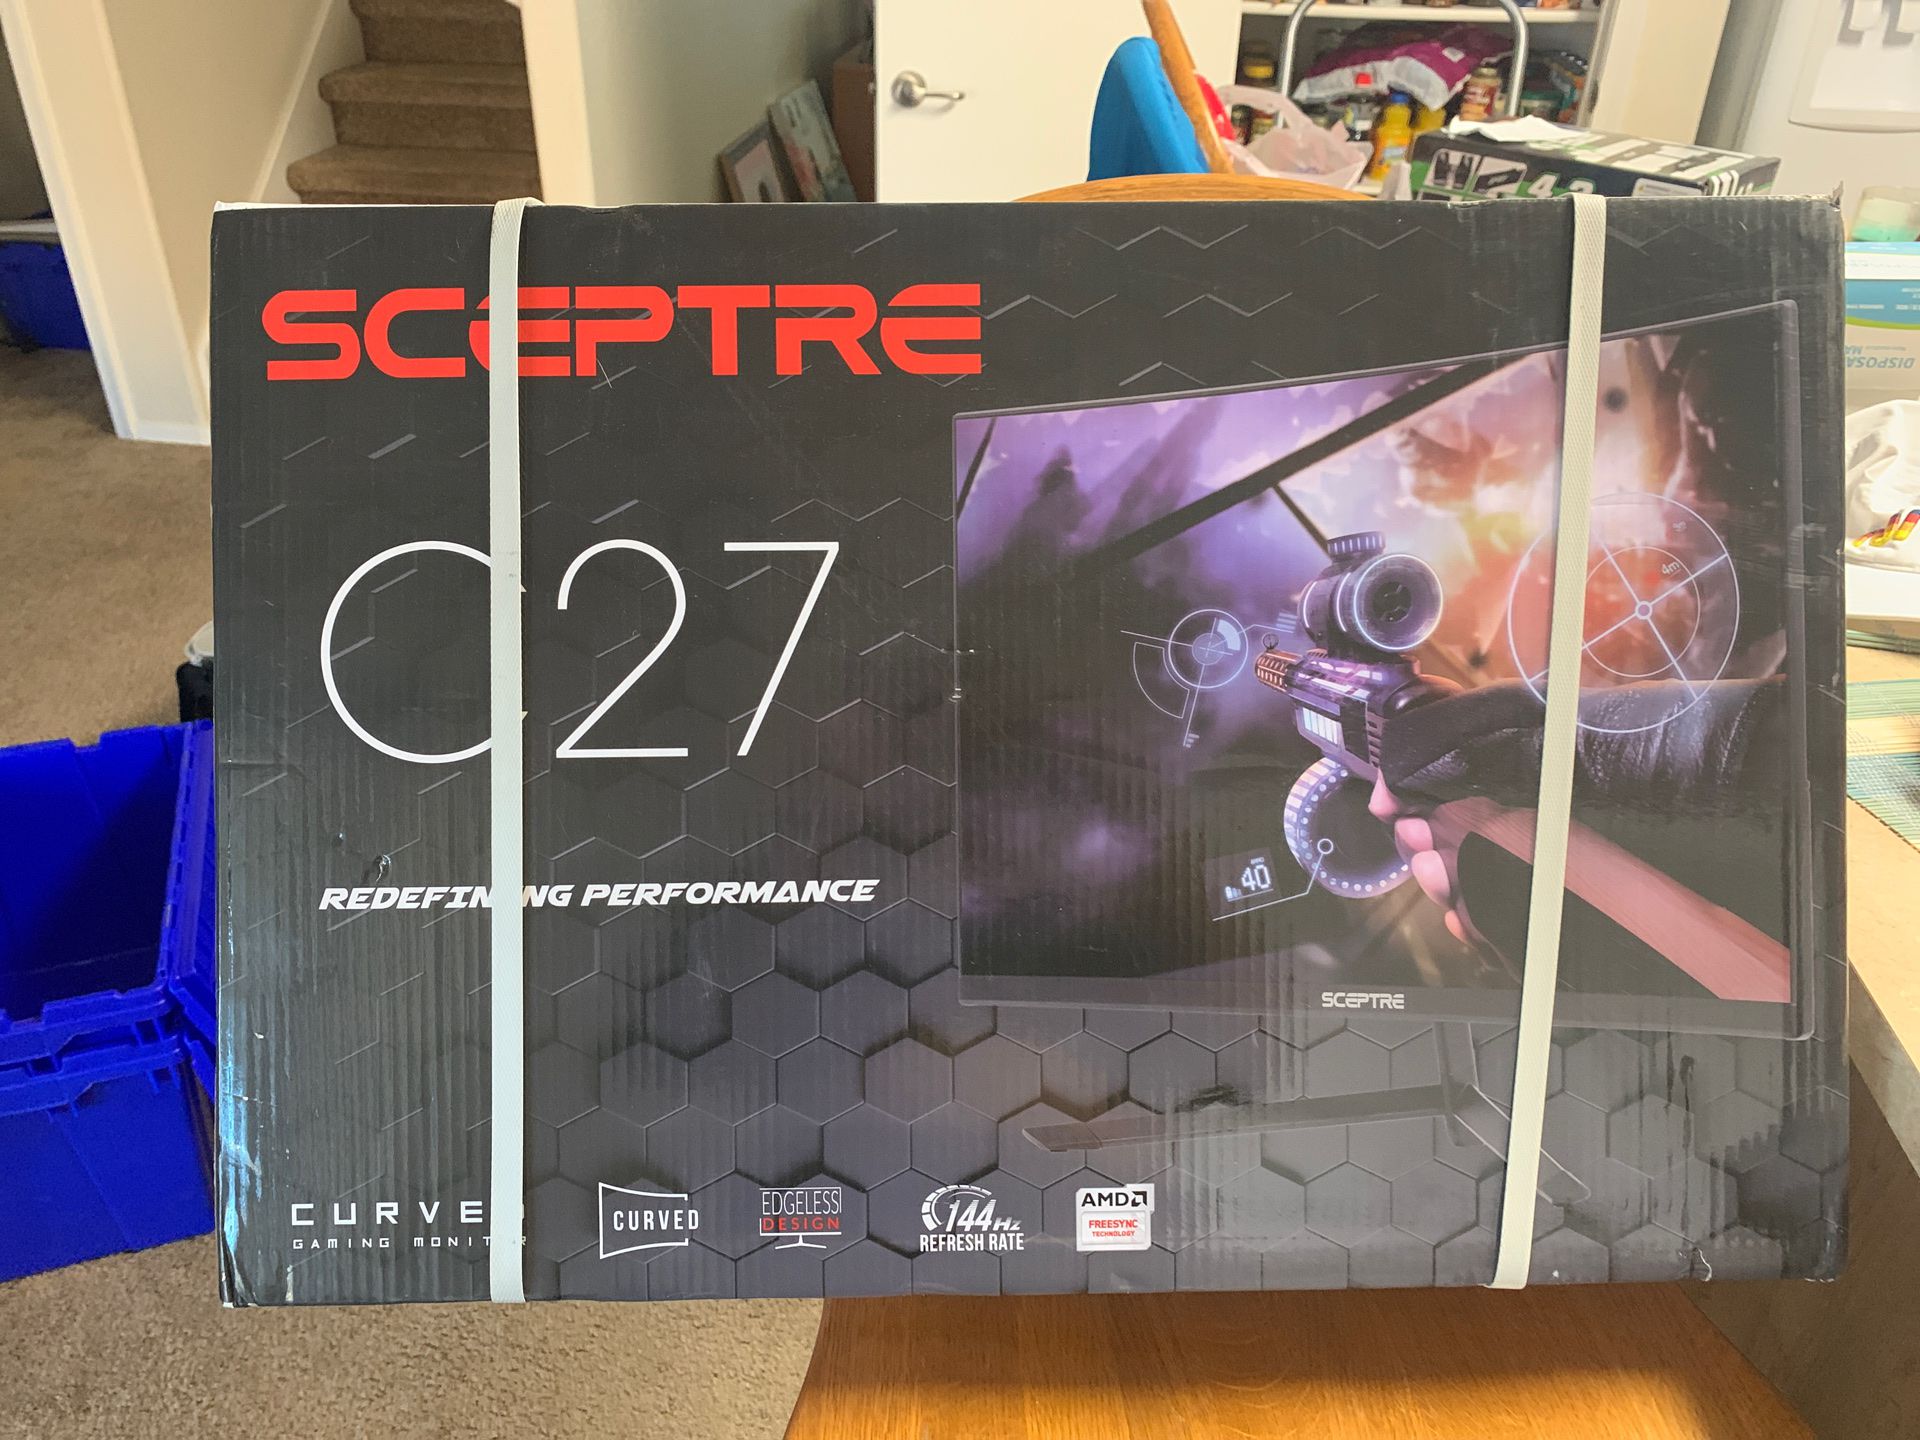 Sceptre C27 Curved Gaming Monitor